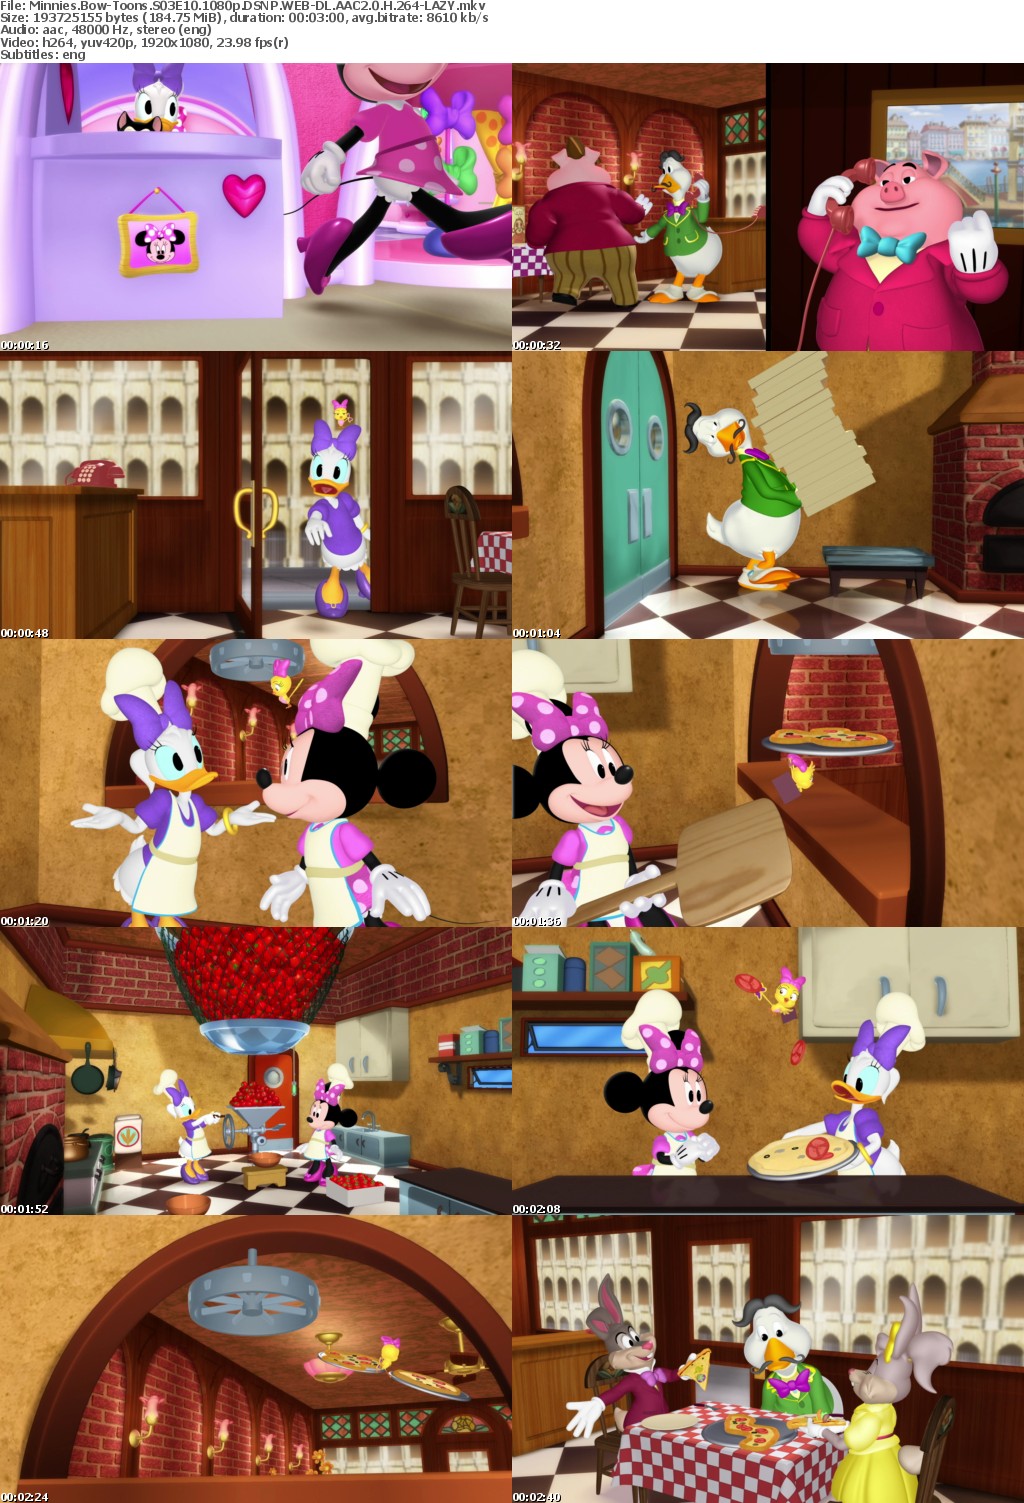 Minnies Bow-Toons S03 1080p DSNP WEBRip AAC2 0 x264-LAZY